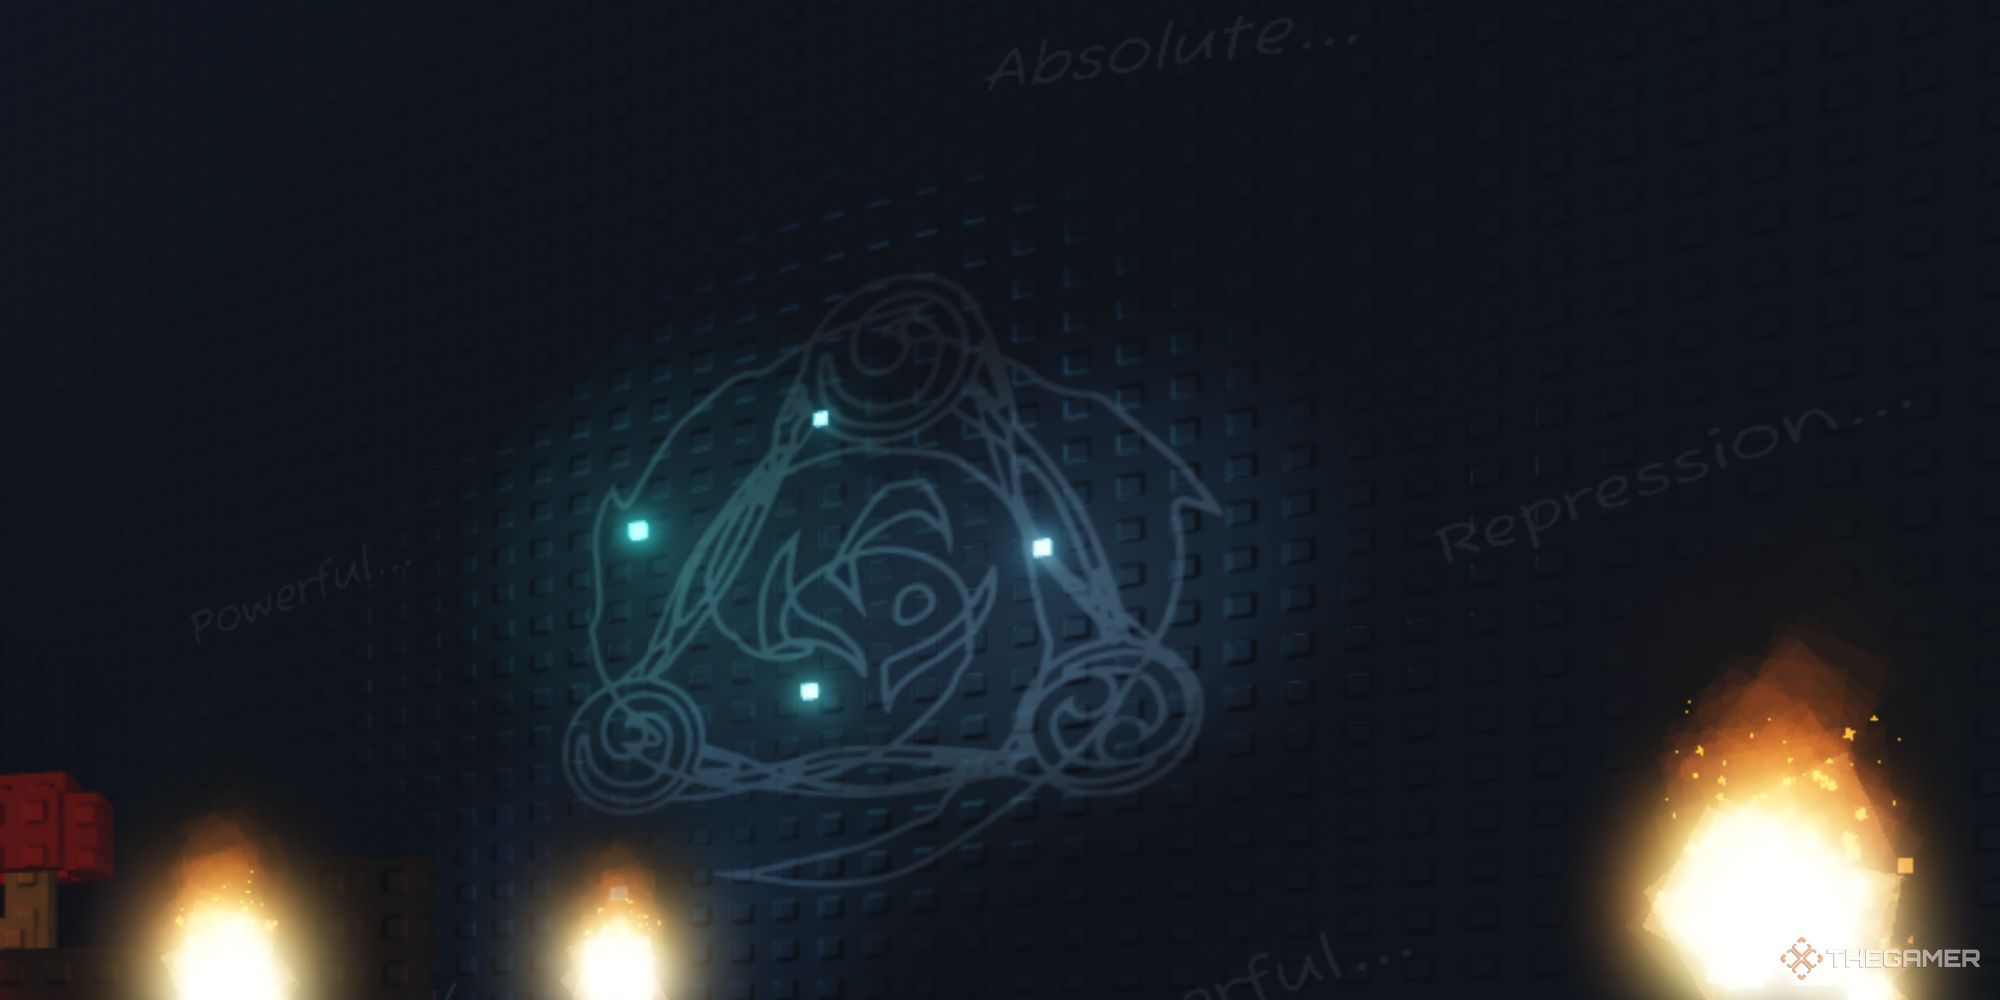 A screenshot from Roblox: Sol's RNG that shows the white chalk altar symbol surrounded by small blue fireflies